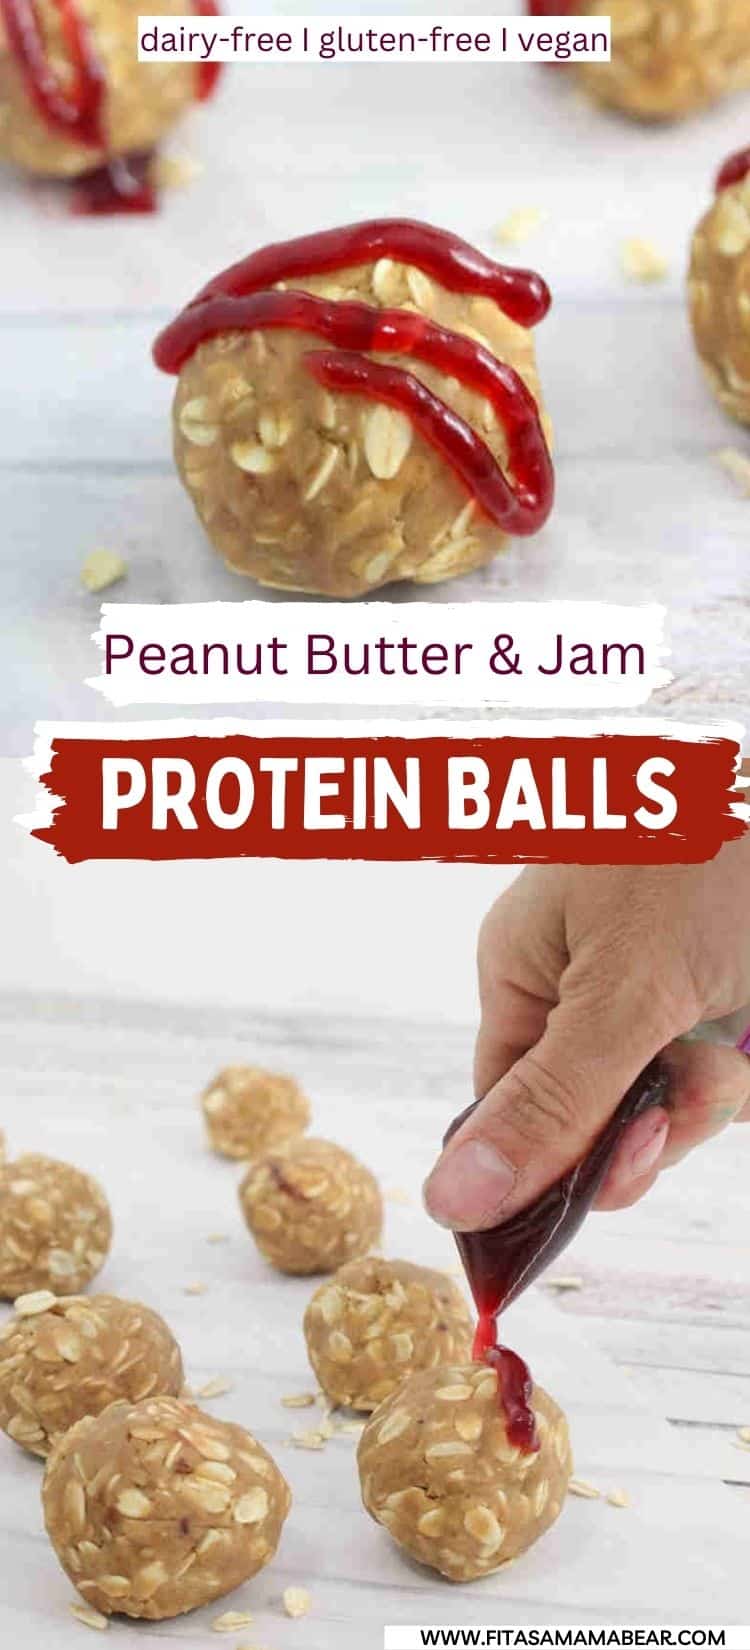 Two images of peanut butter protein balls drizzled with jam the top of a close up and the bottom of jam being drizzled.